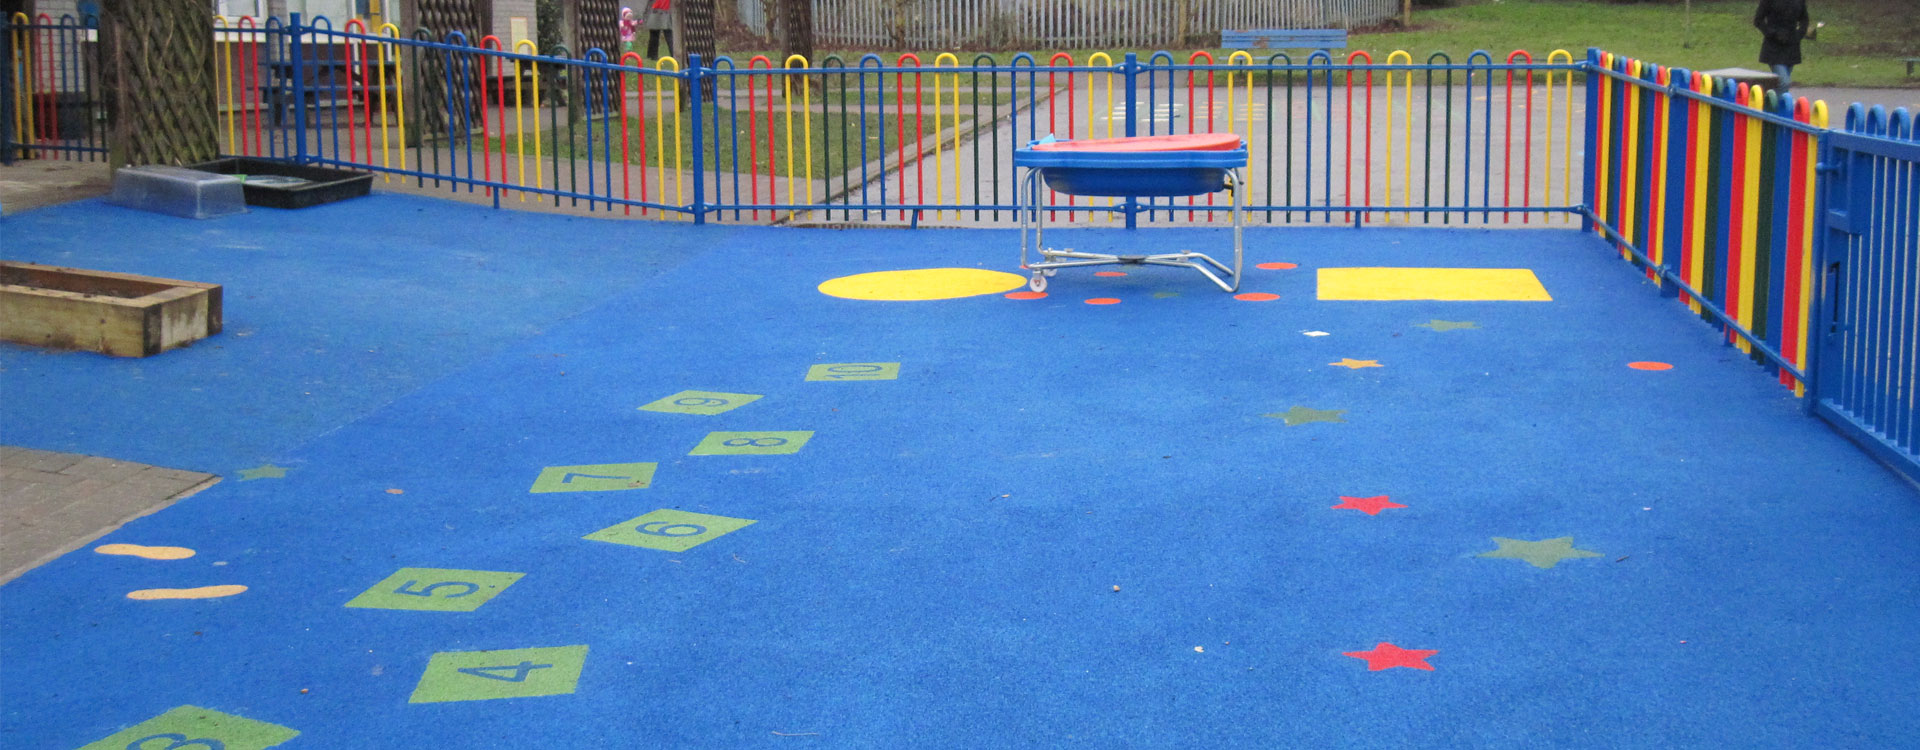 Epdm Sbr Rubber Surfacing Playground Flooring Soft Surfaces